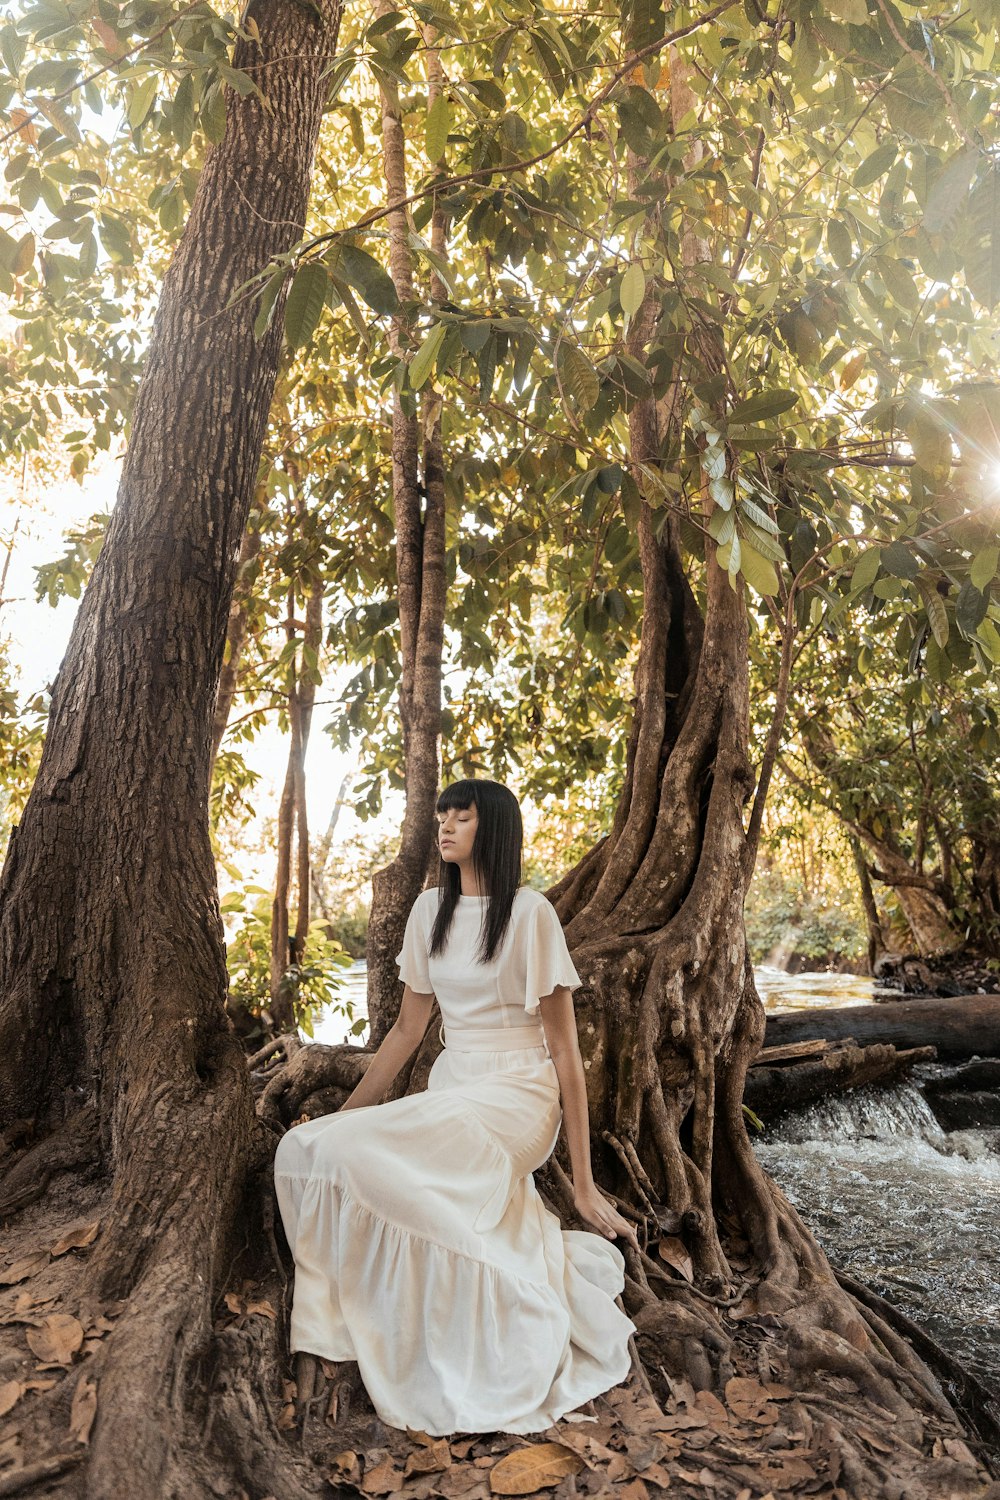 woman in white dress sitting on brown tree trunk during daytime